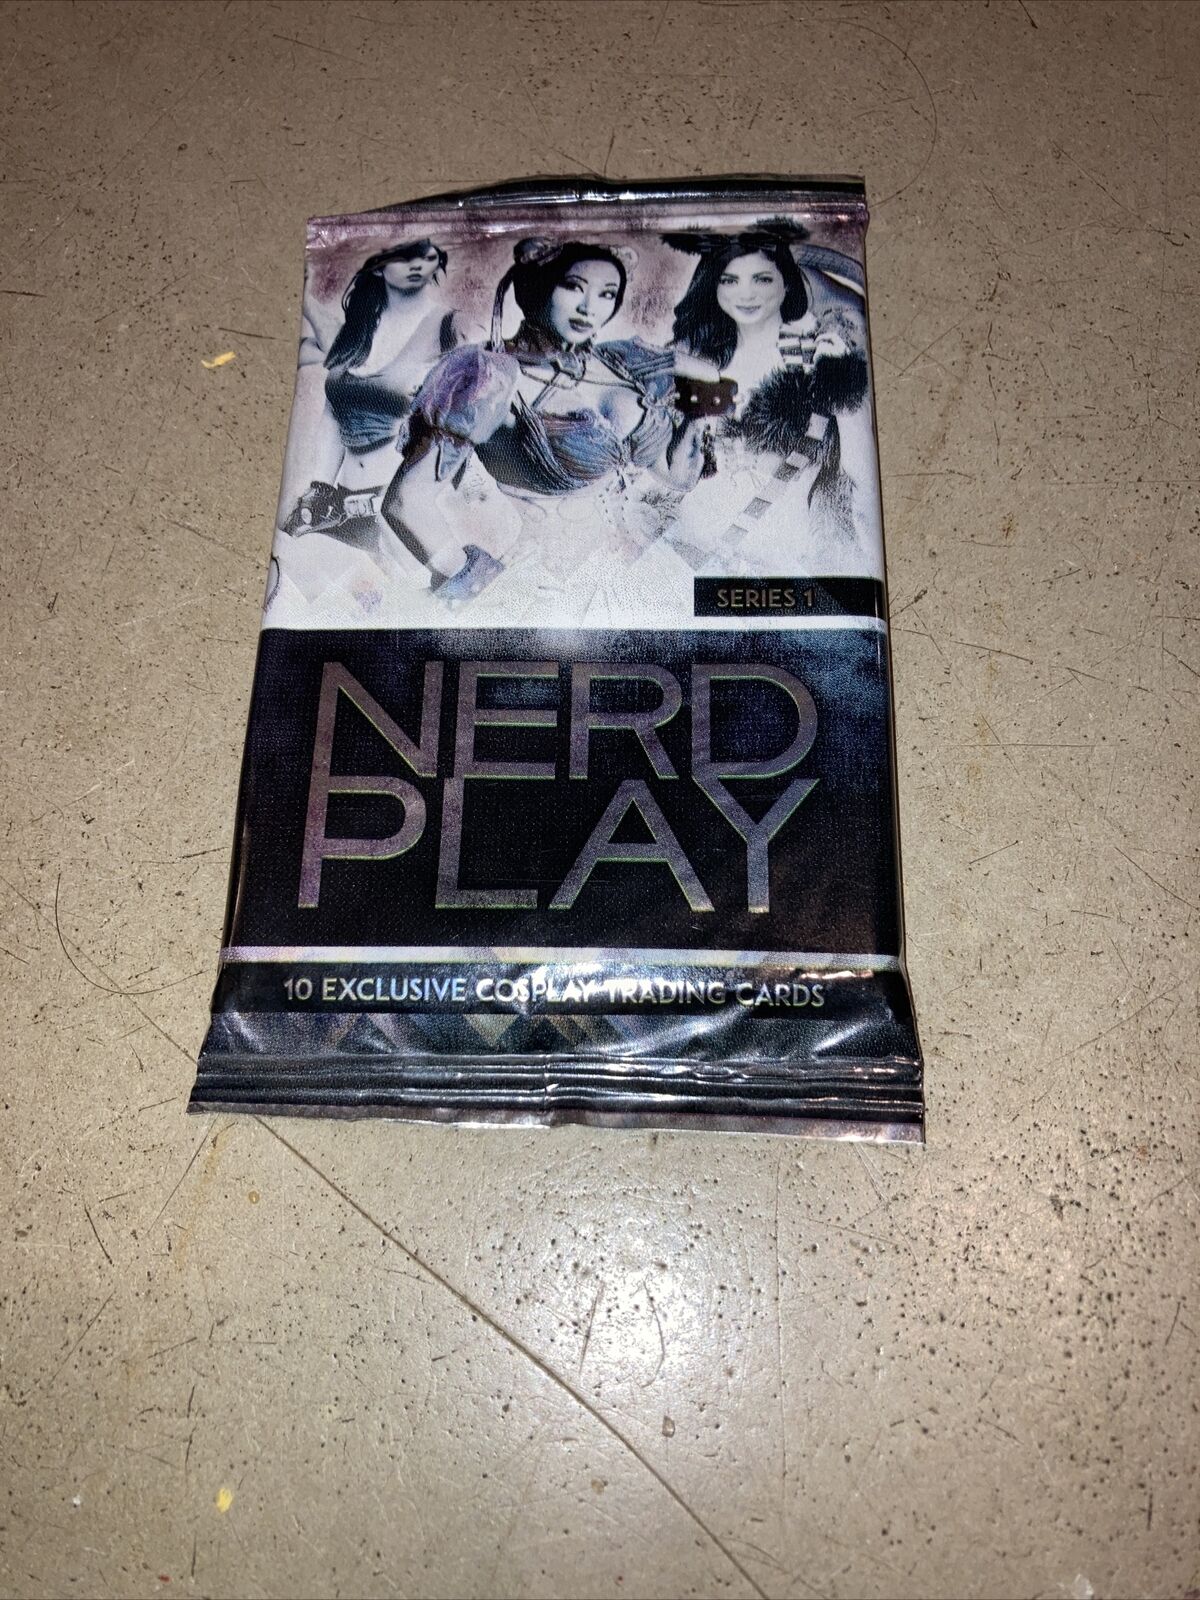 Series One Nerd Play 10 Exclusive Cosplay Trading Cards. 10 cards. Sealed